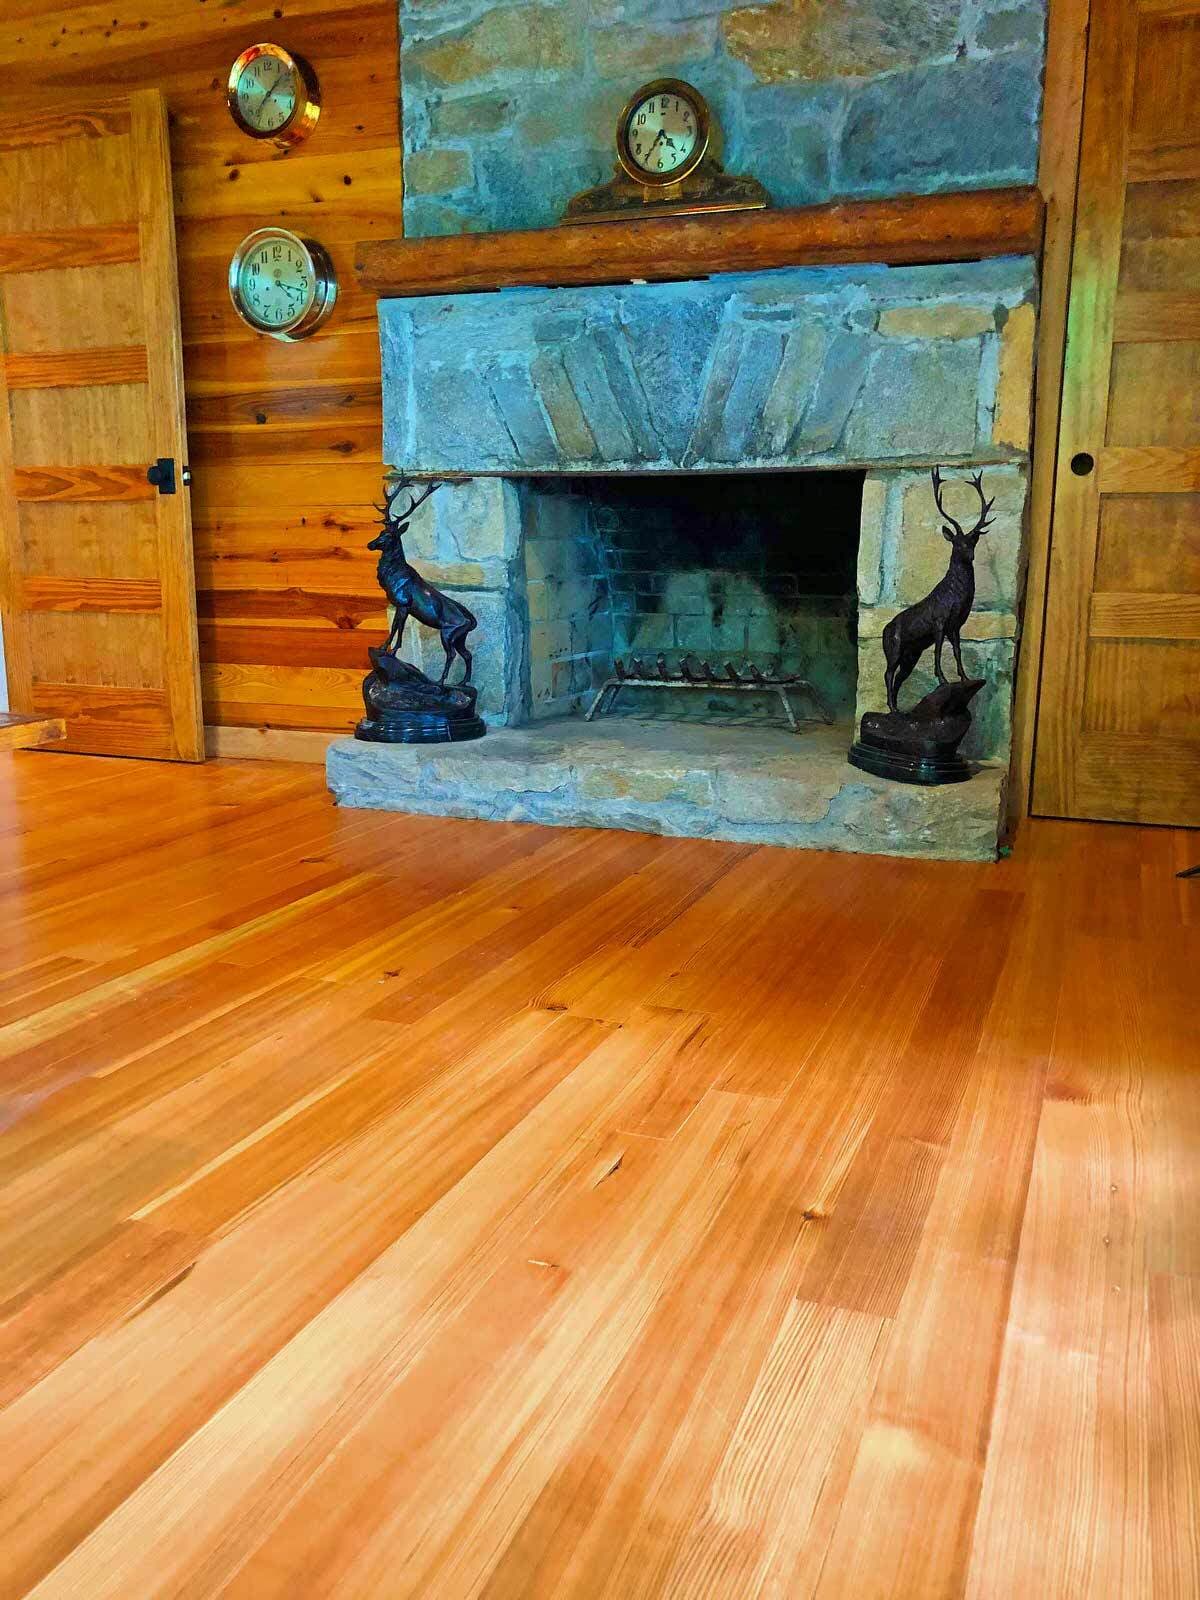 Classic old wood floors reclaimed and restored to original beauty.